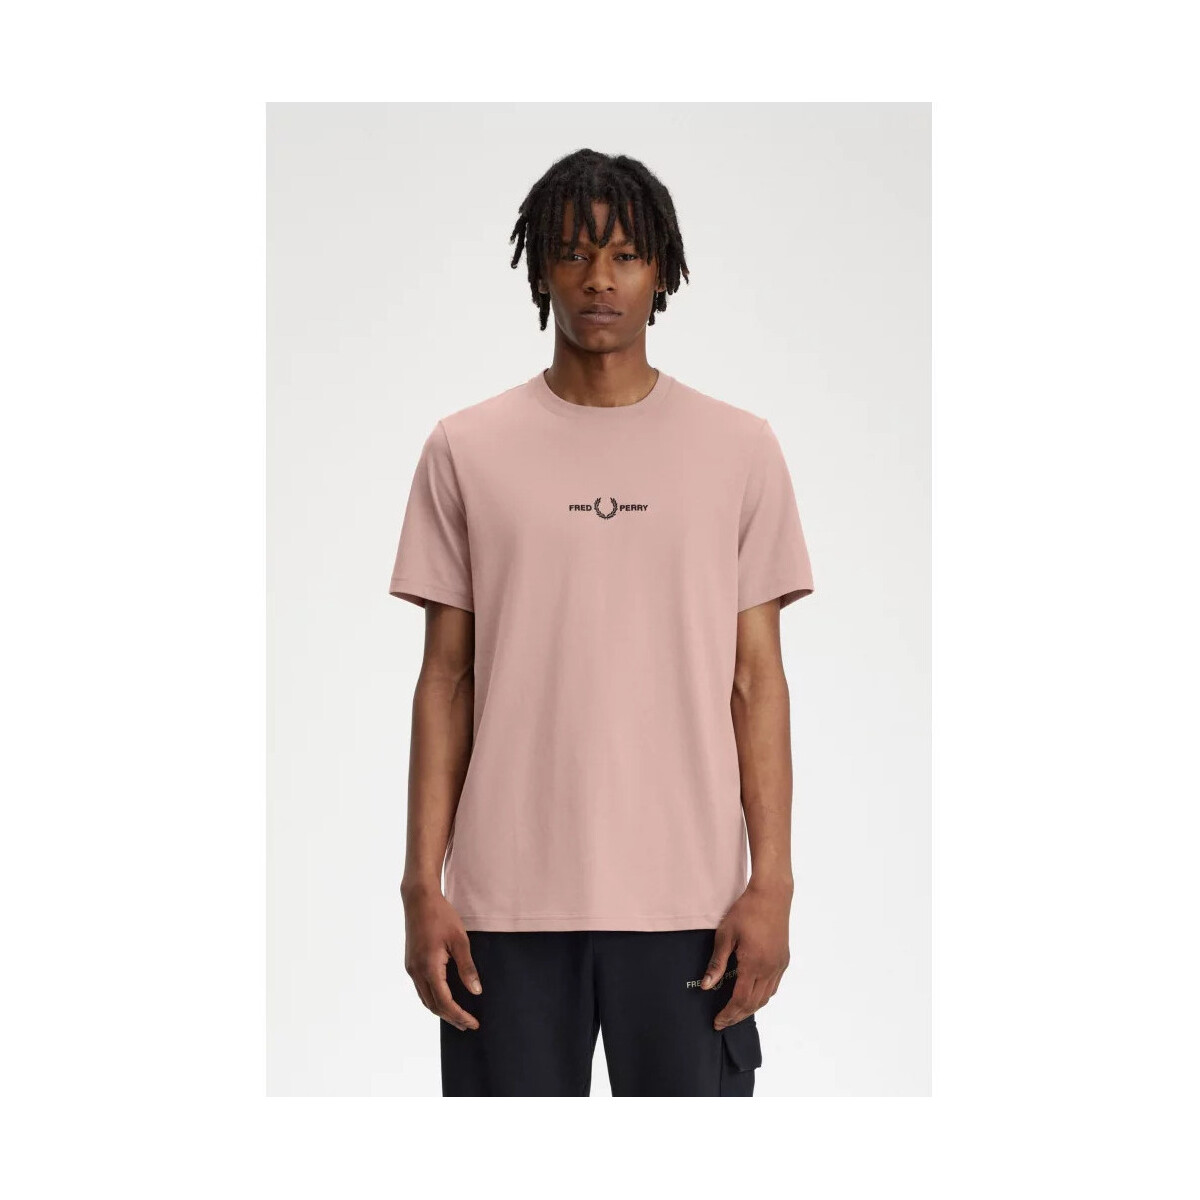 Vêtements Homme T-shirts manches courtes Fred Perry - EMBROIDERED T-SHIRT Rose